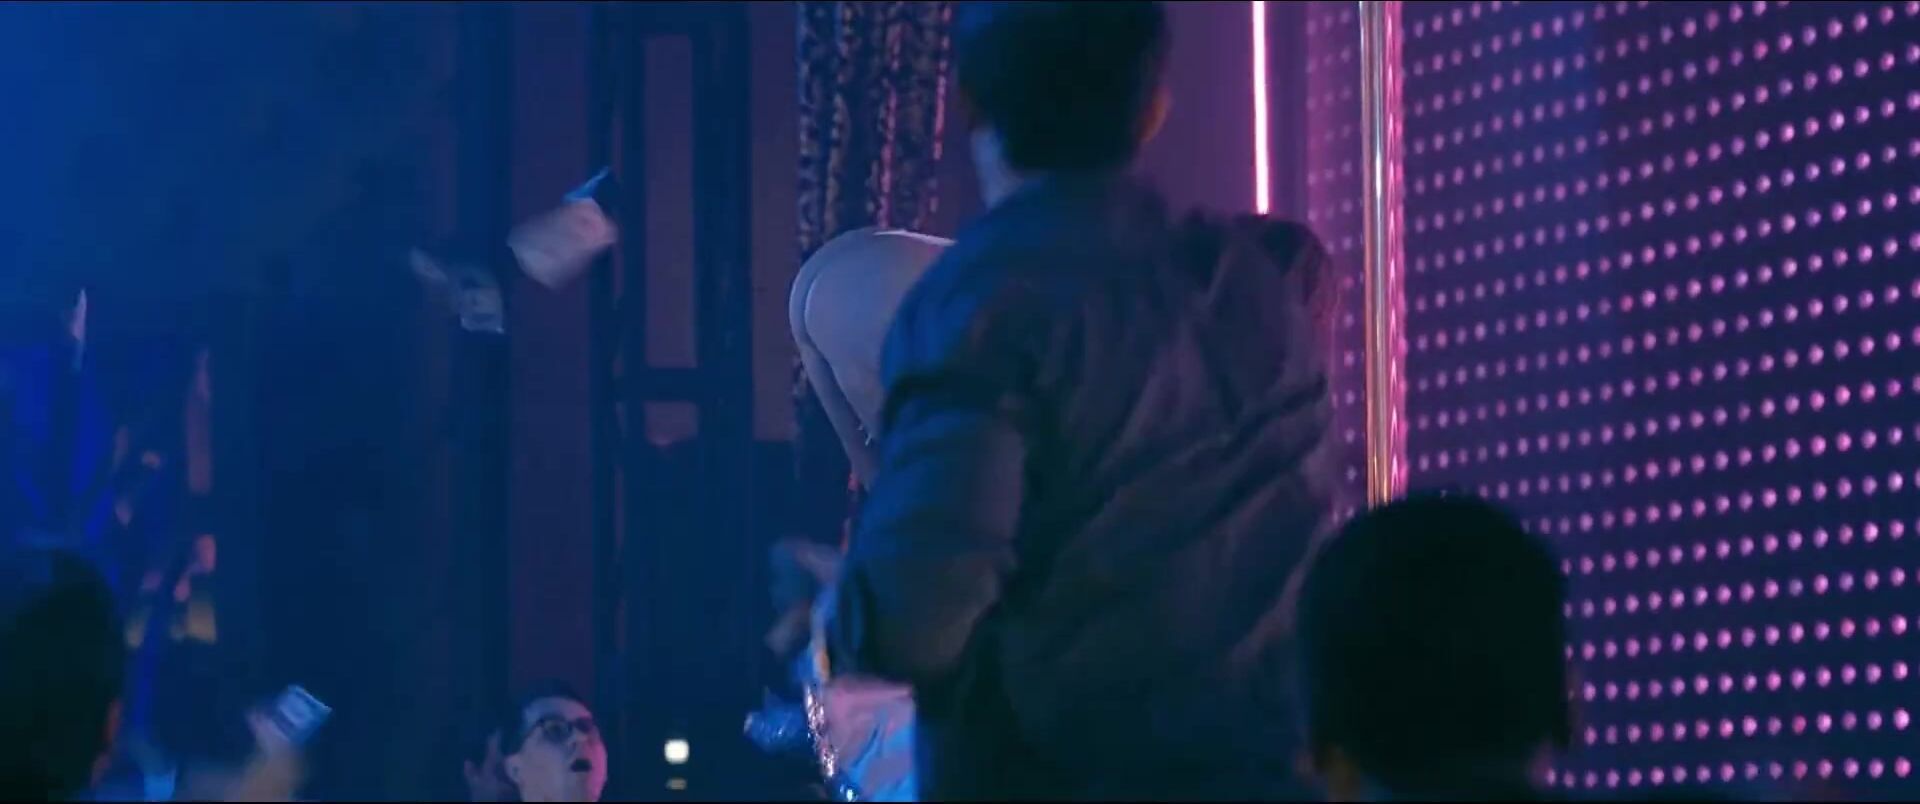 Perfect Body Hot Latina and Eastern strippers Jennifer Lopez and Constance Wu nude in Hustlers (2019) Strange